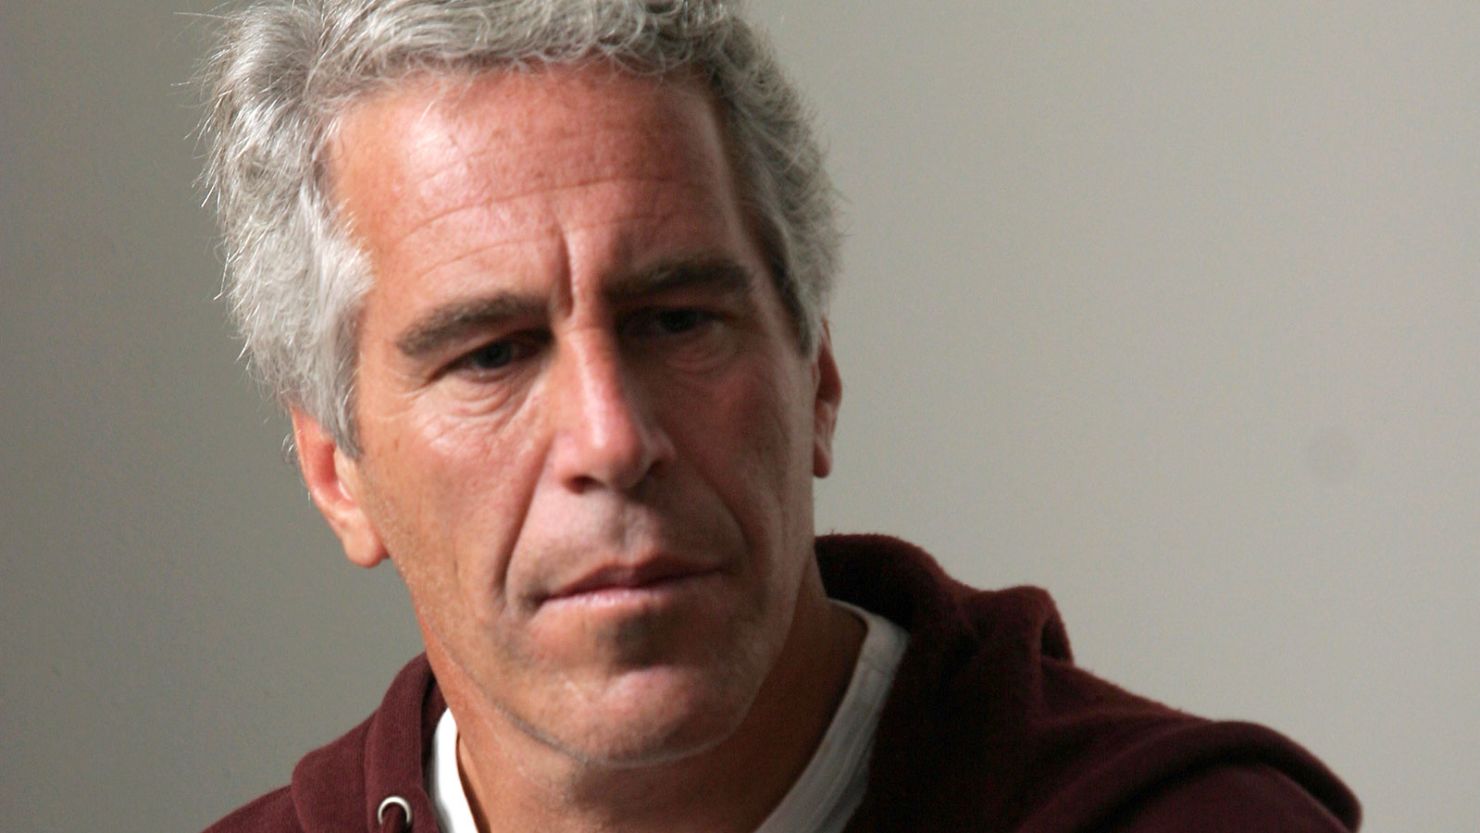 Jeffrey Epstein was accused of abusing many victims.